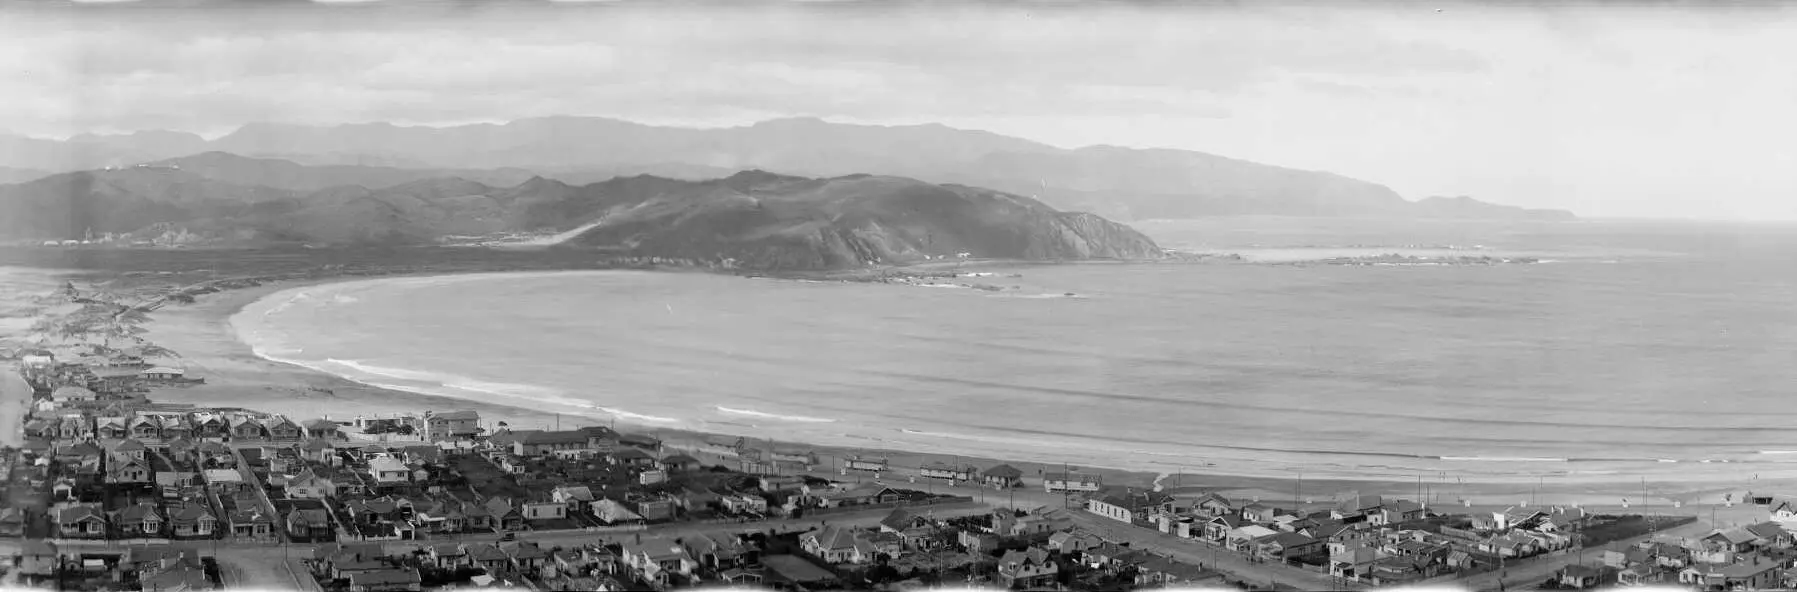 A black and white photo from a ridgetop overlooking the beachside community of Llyal Bay with the large sweep of coast looking out to the headlands and beyond. 